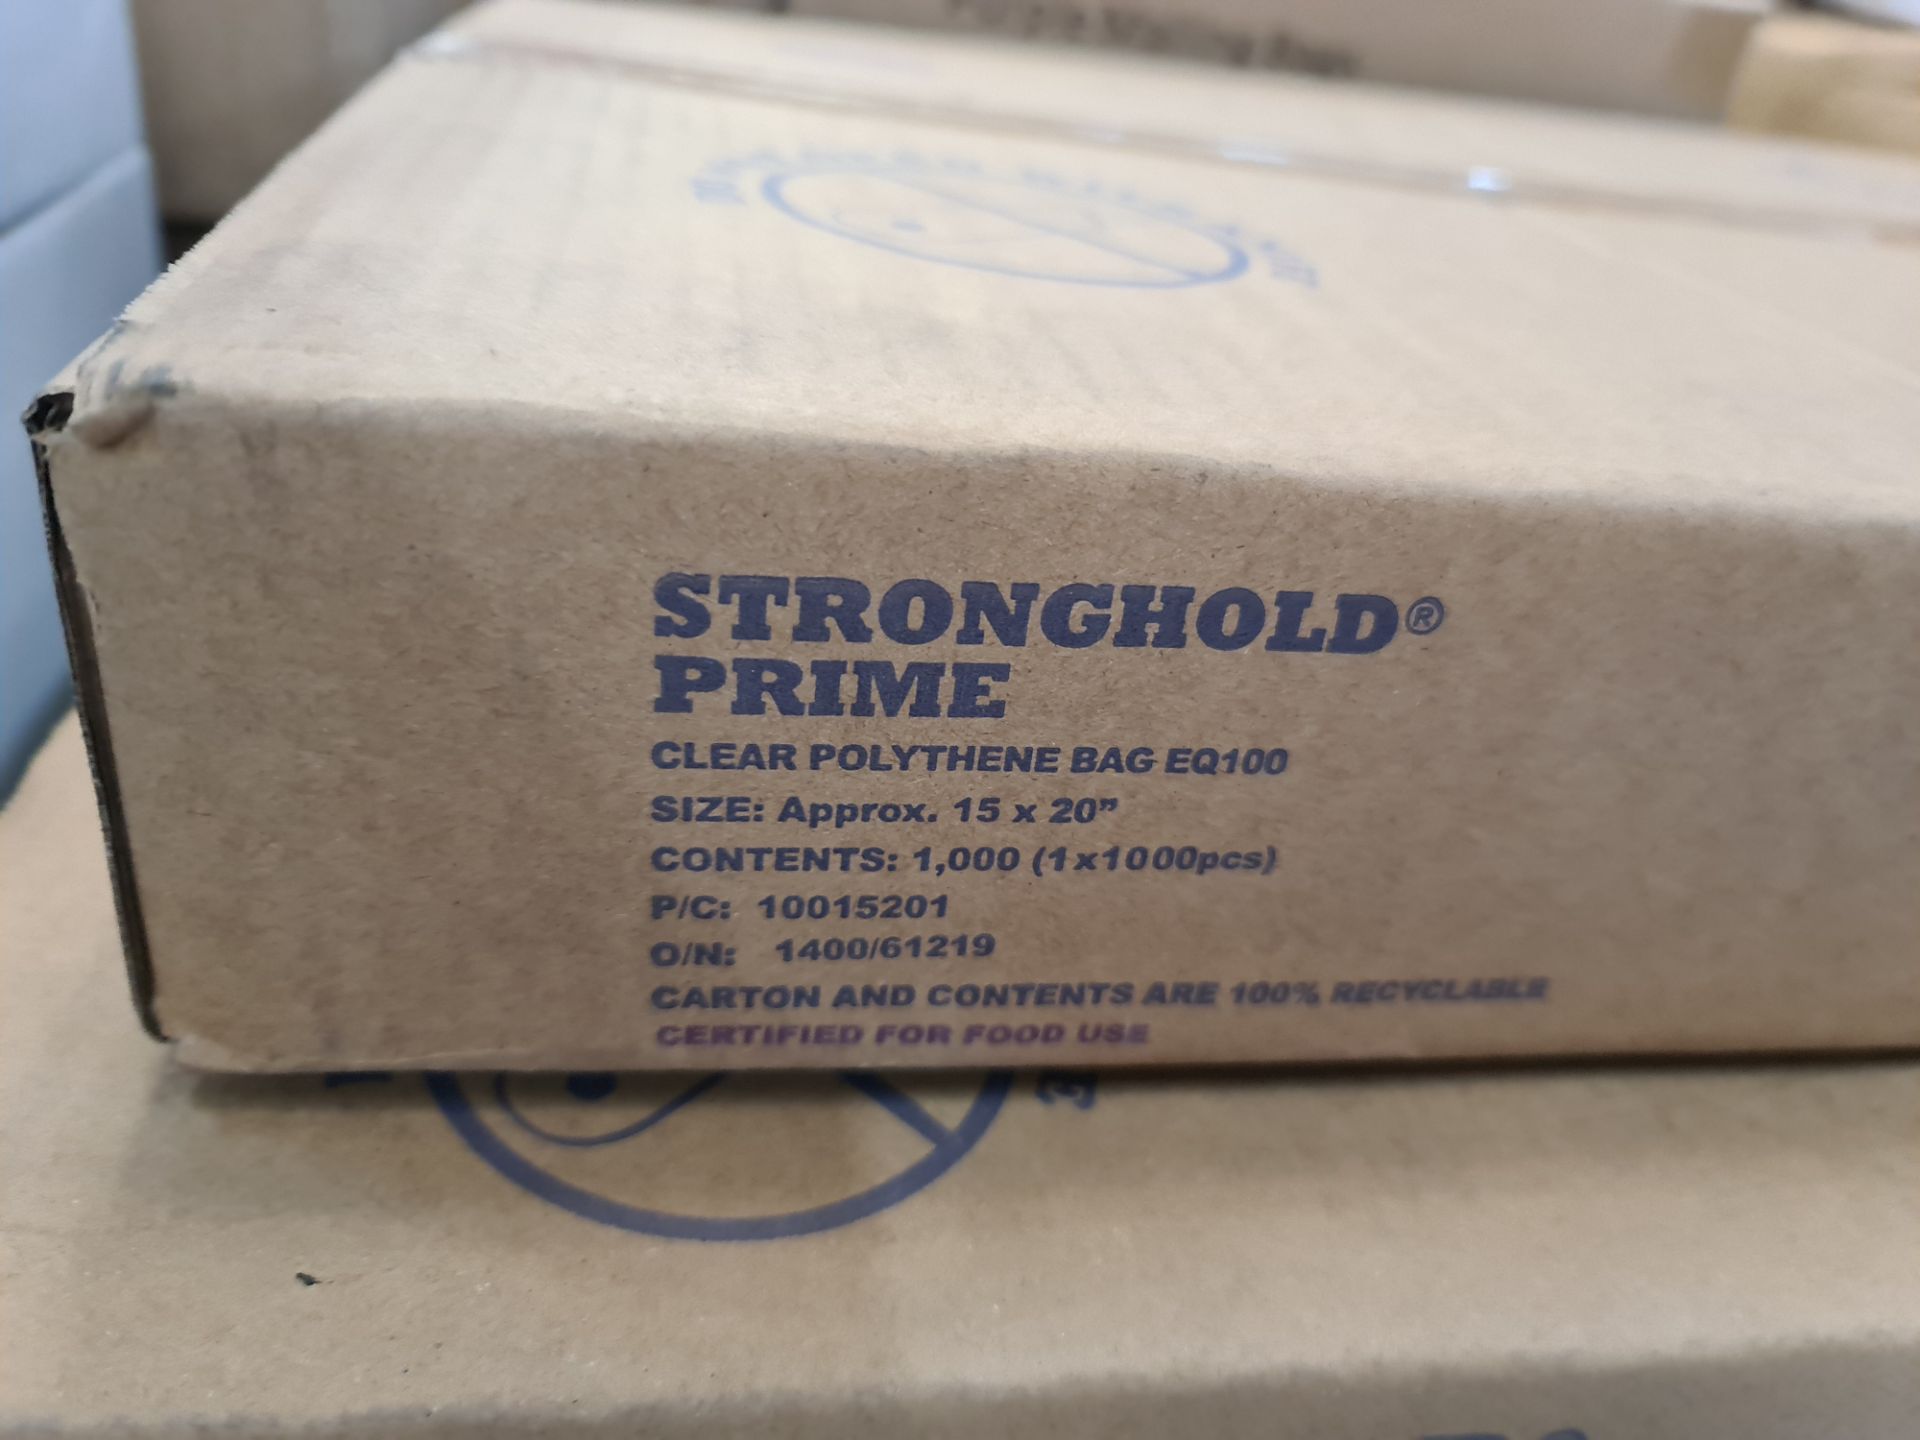 8 assorted sized boxes of Stronghold Prime high quality clear polythene bags in assorted sizes & sty - Image 6 of 6